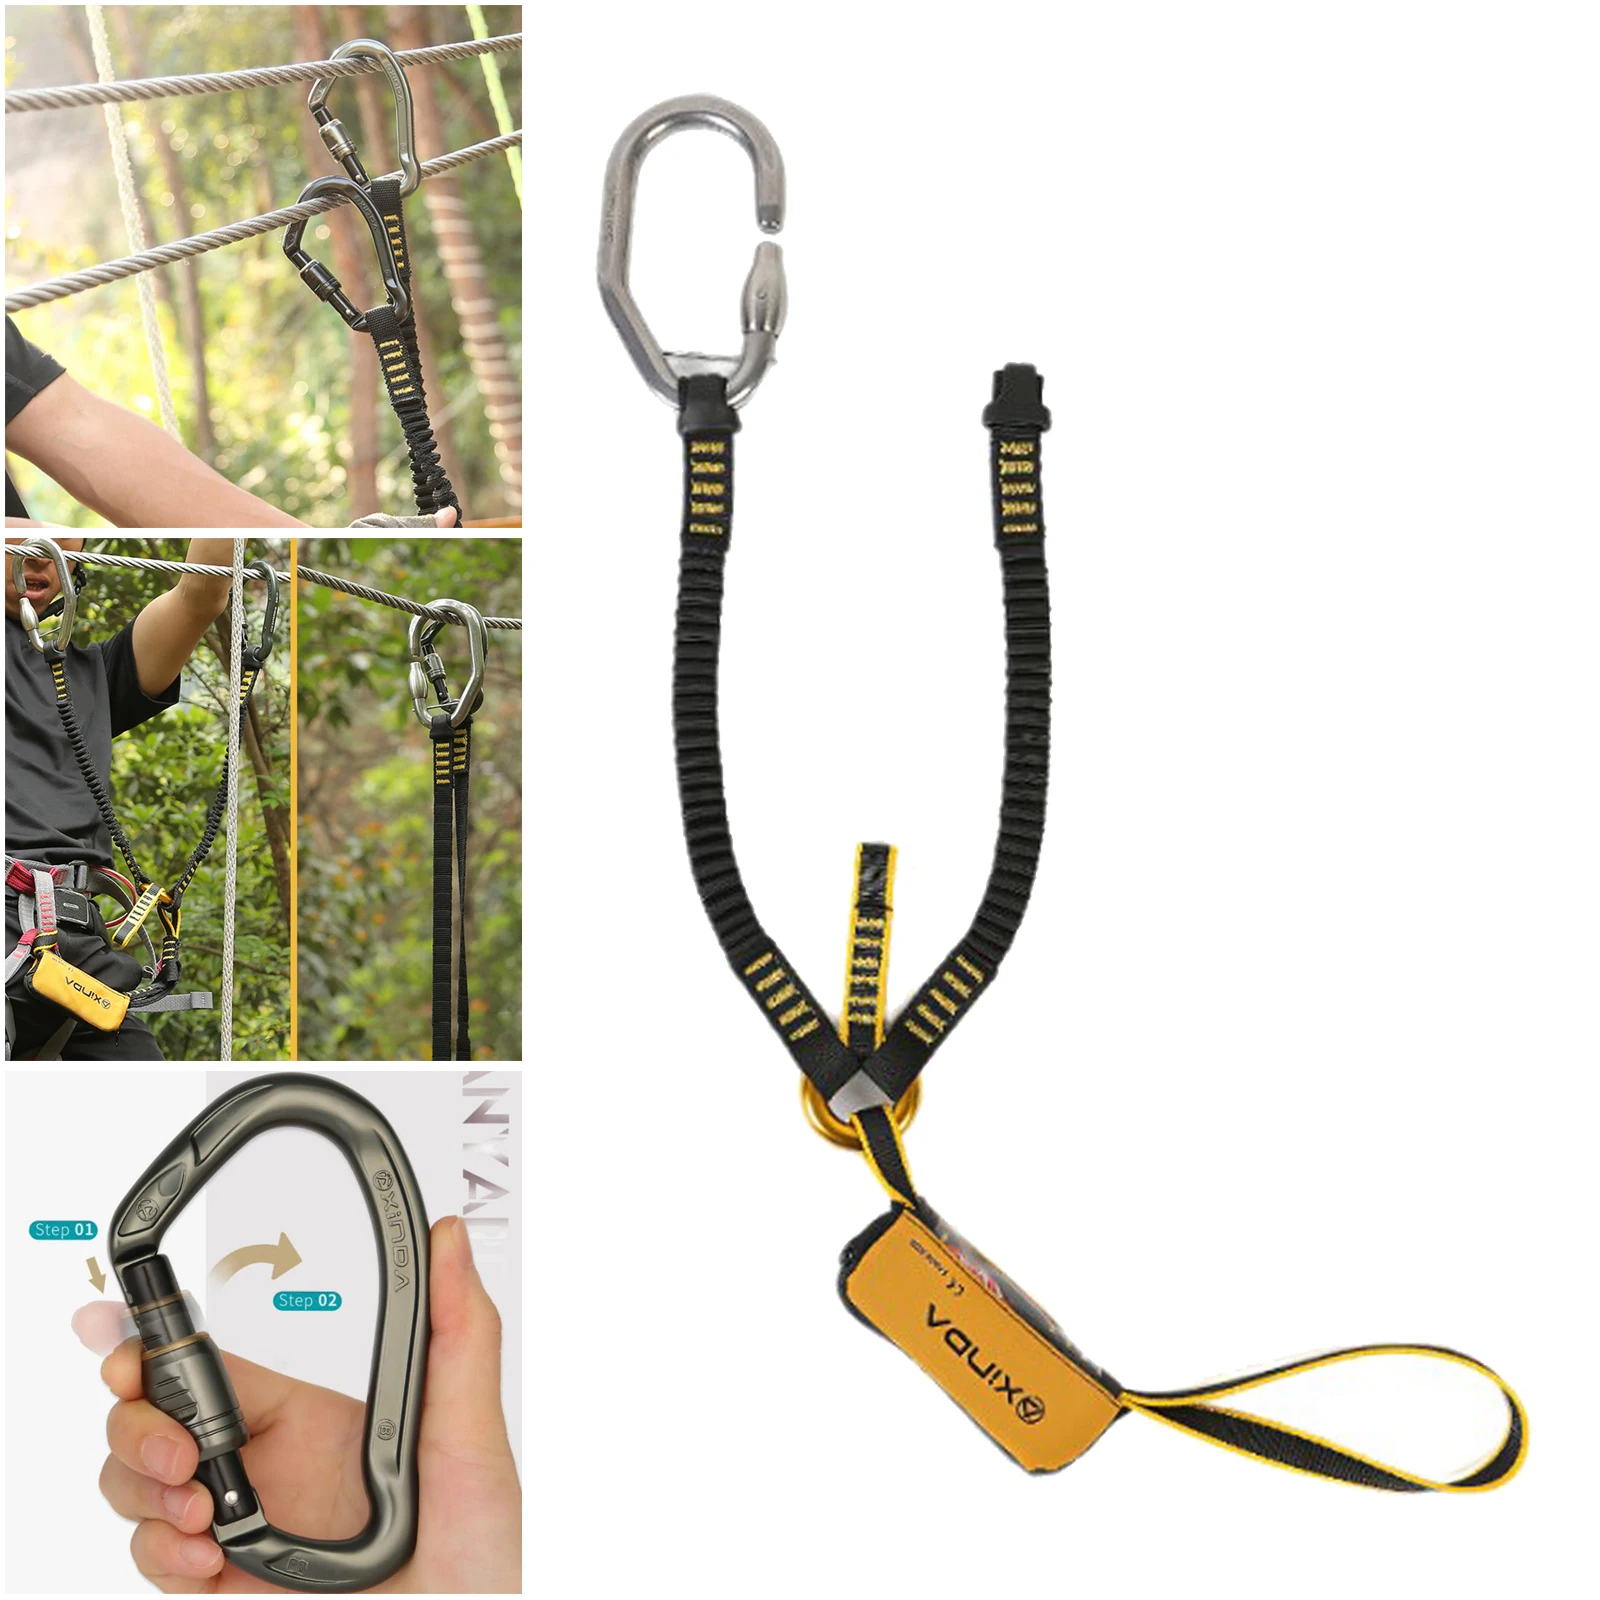 Safety Lanyard Shock Absorbing Anti-Fall Harness Sling Belt Protective Cord